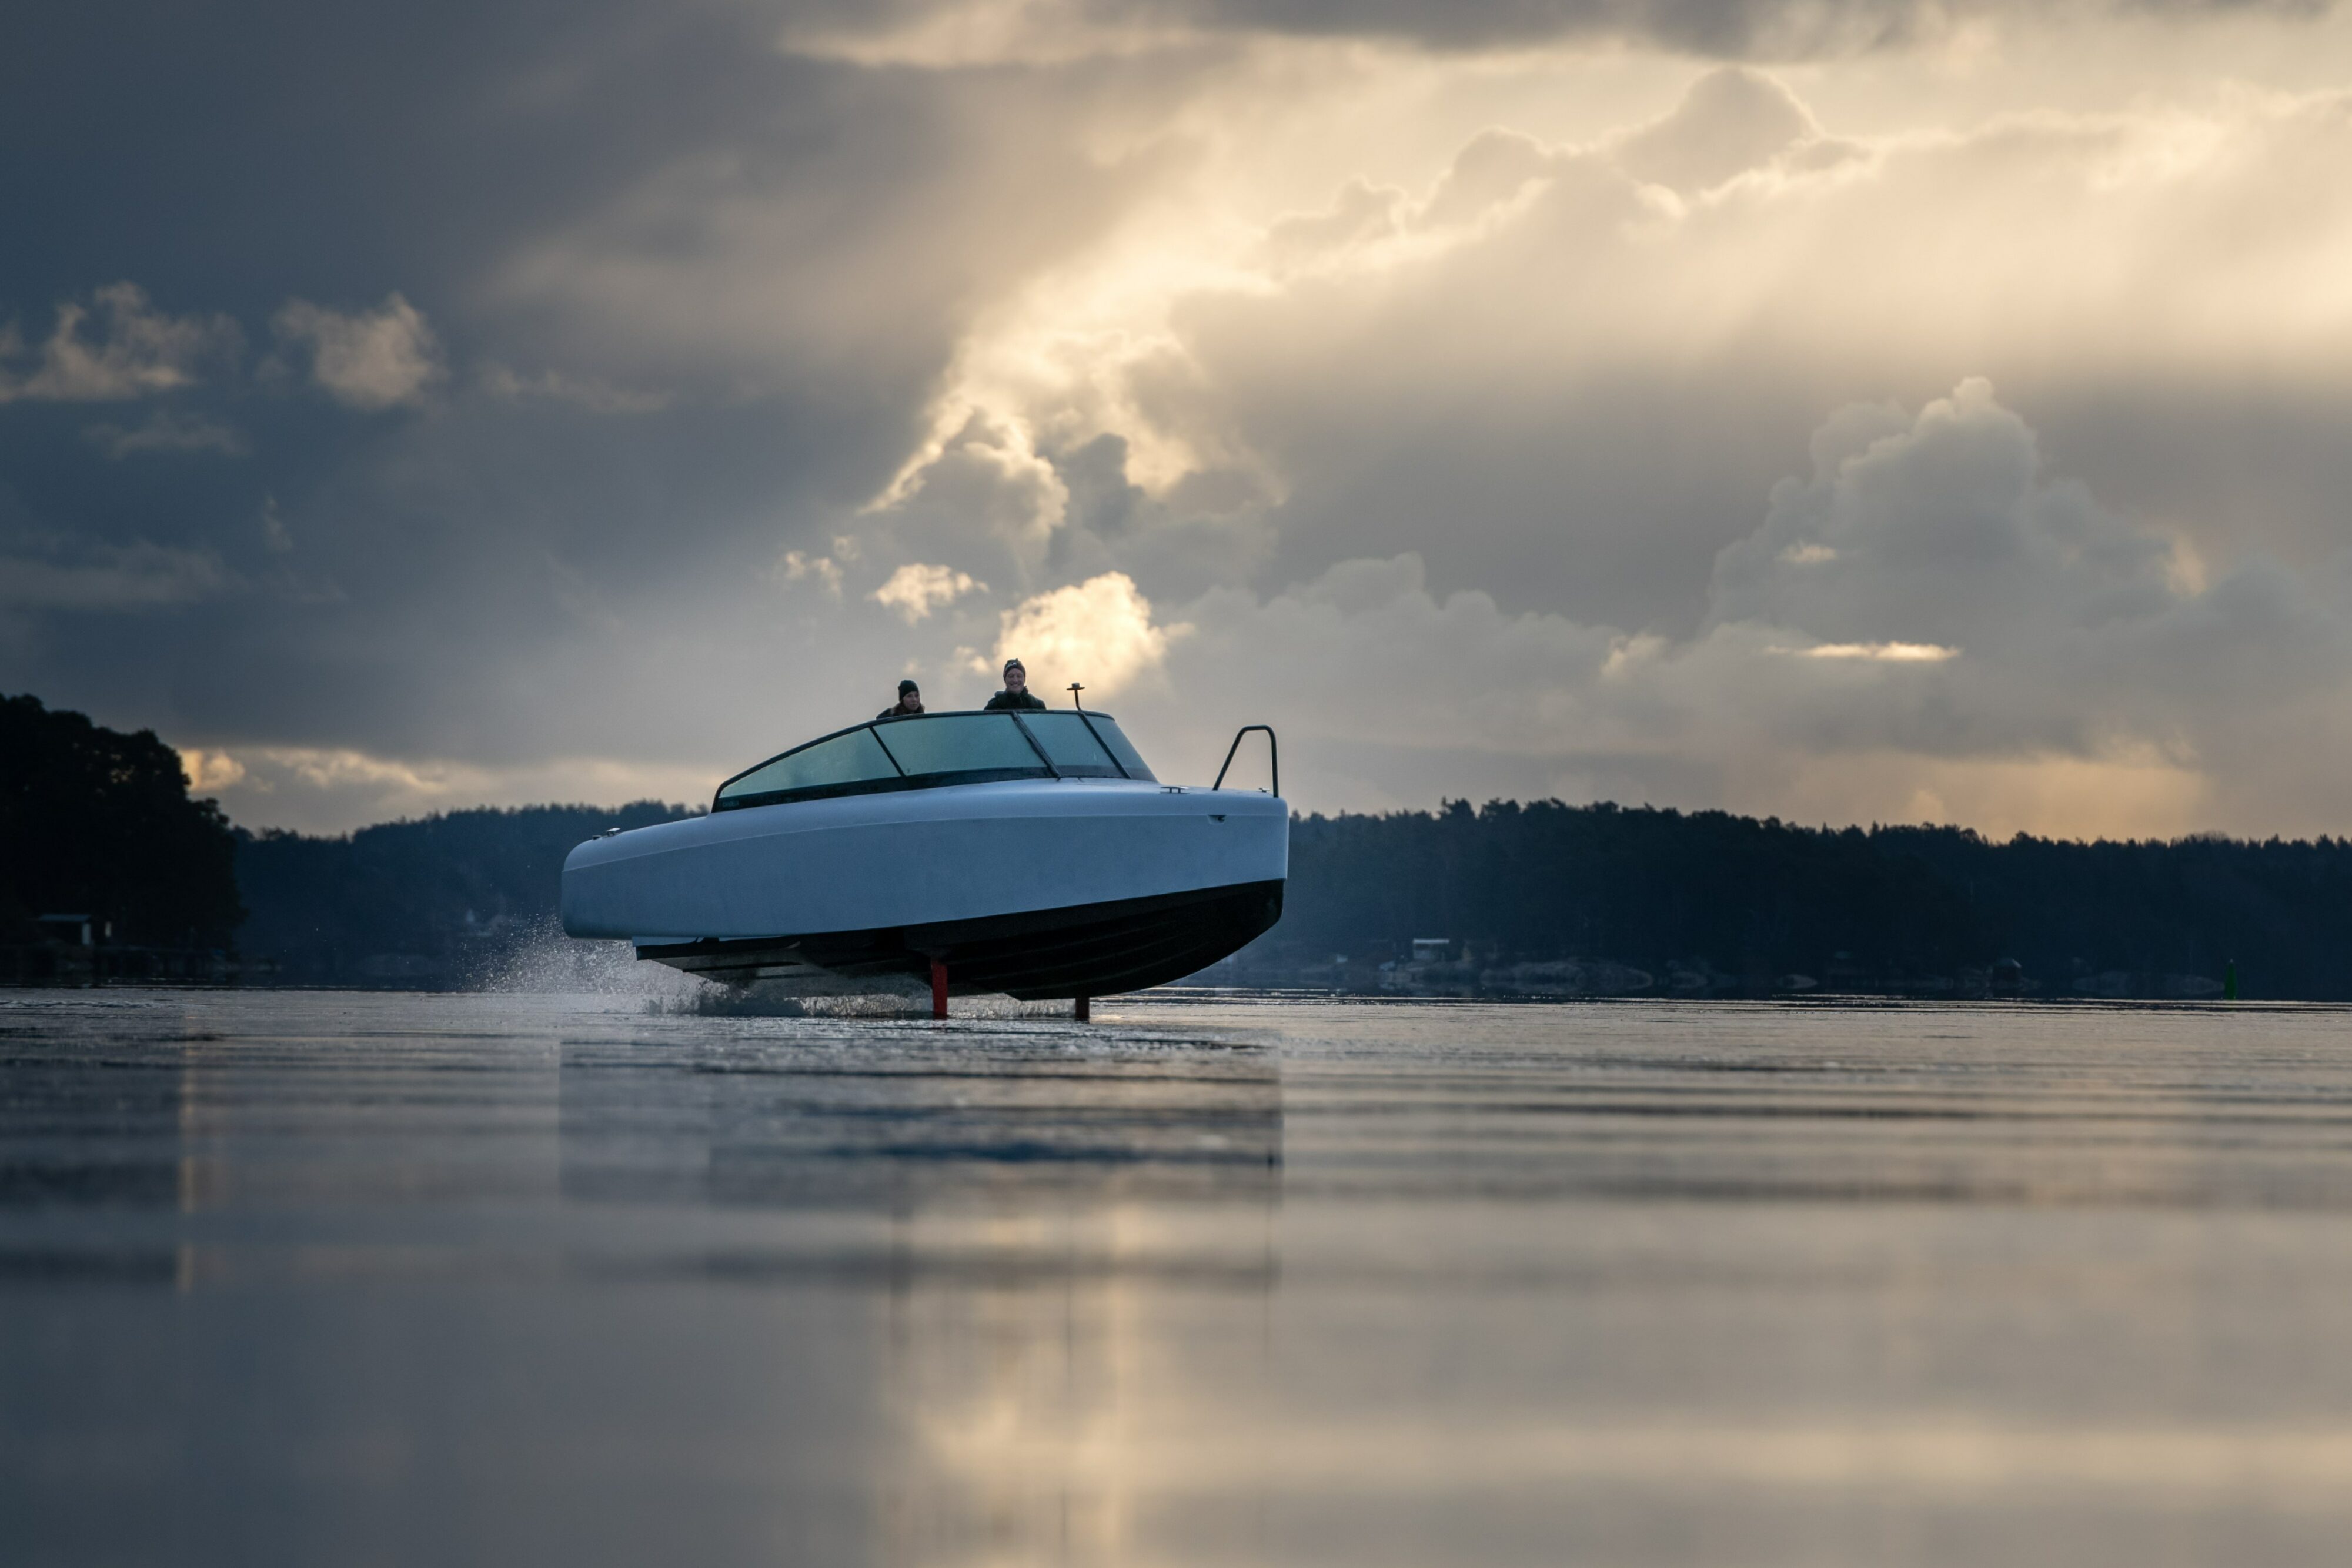 Candela Polestar hydrofoil on the water